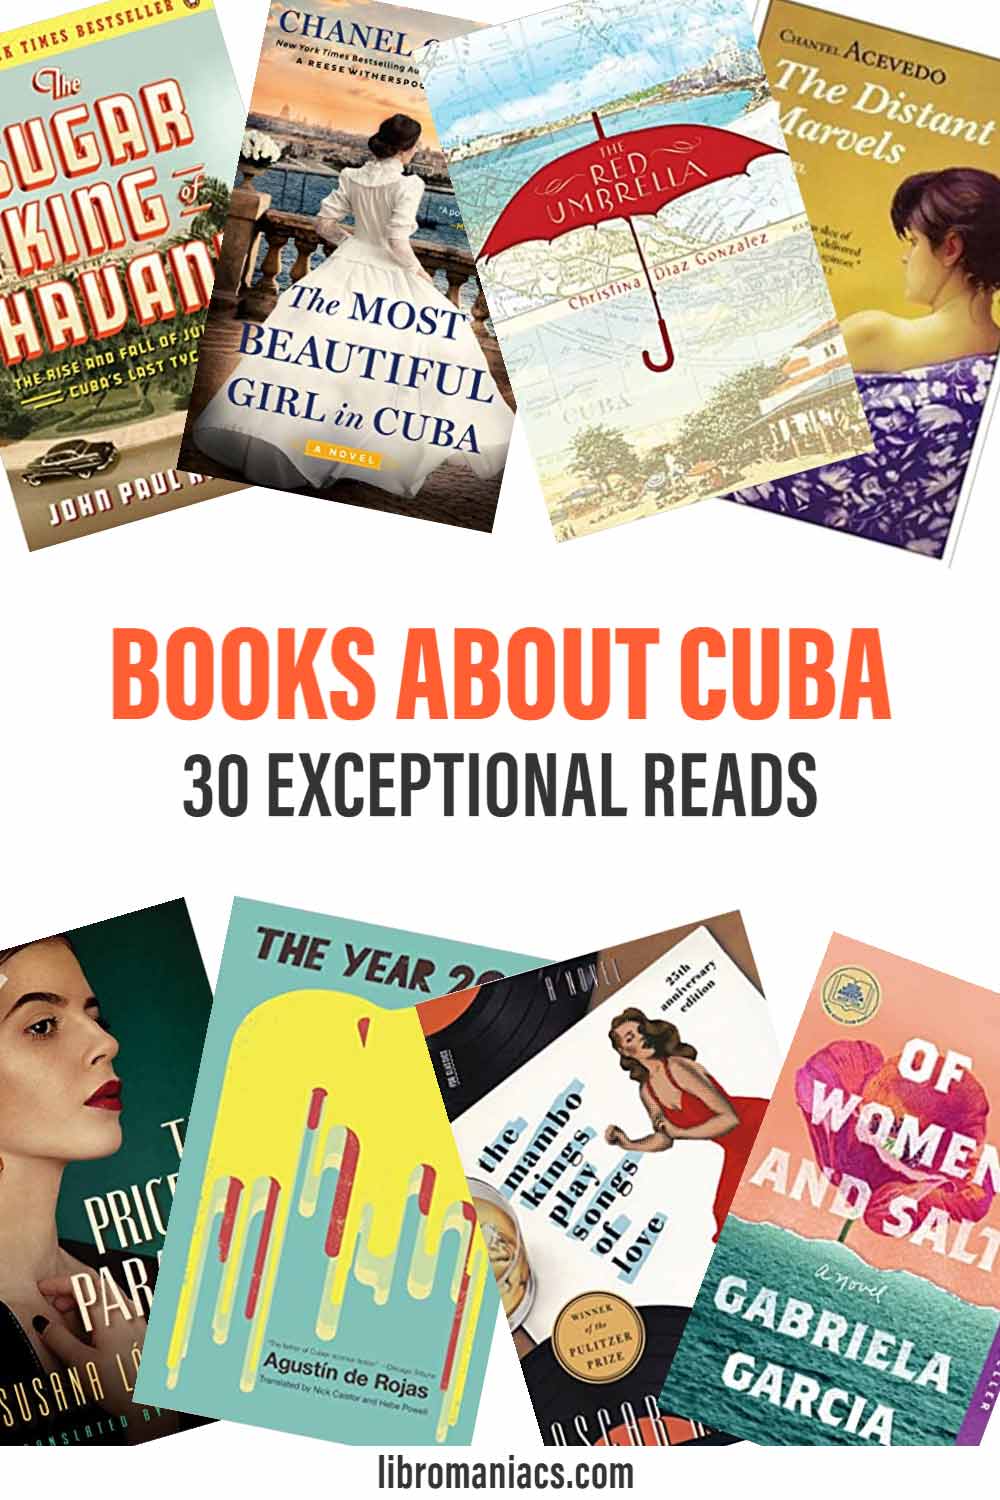 Books about Cuba reads